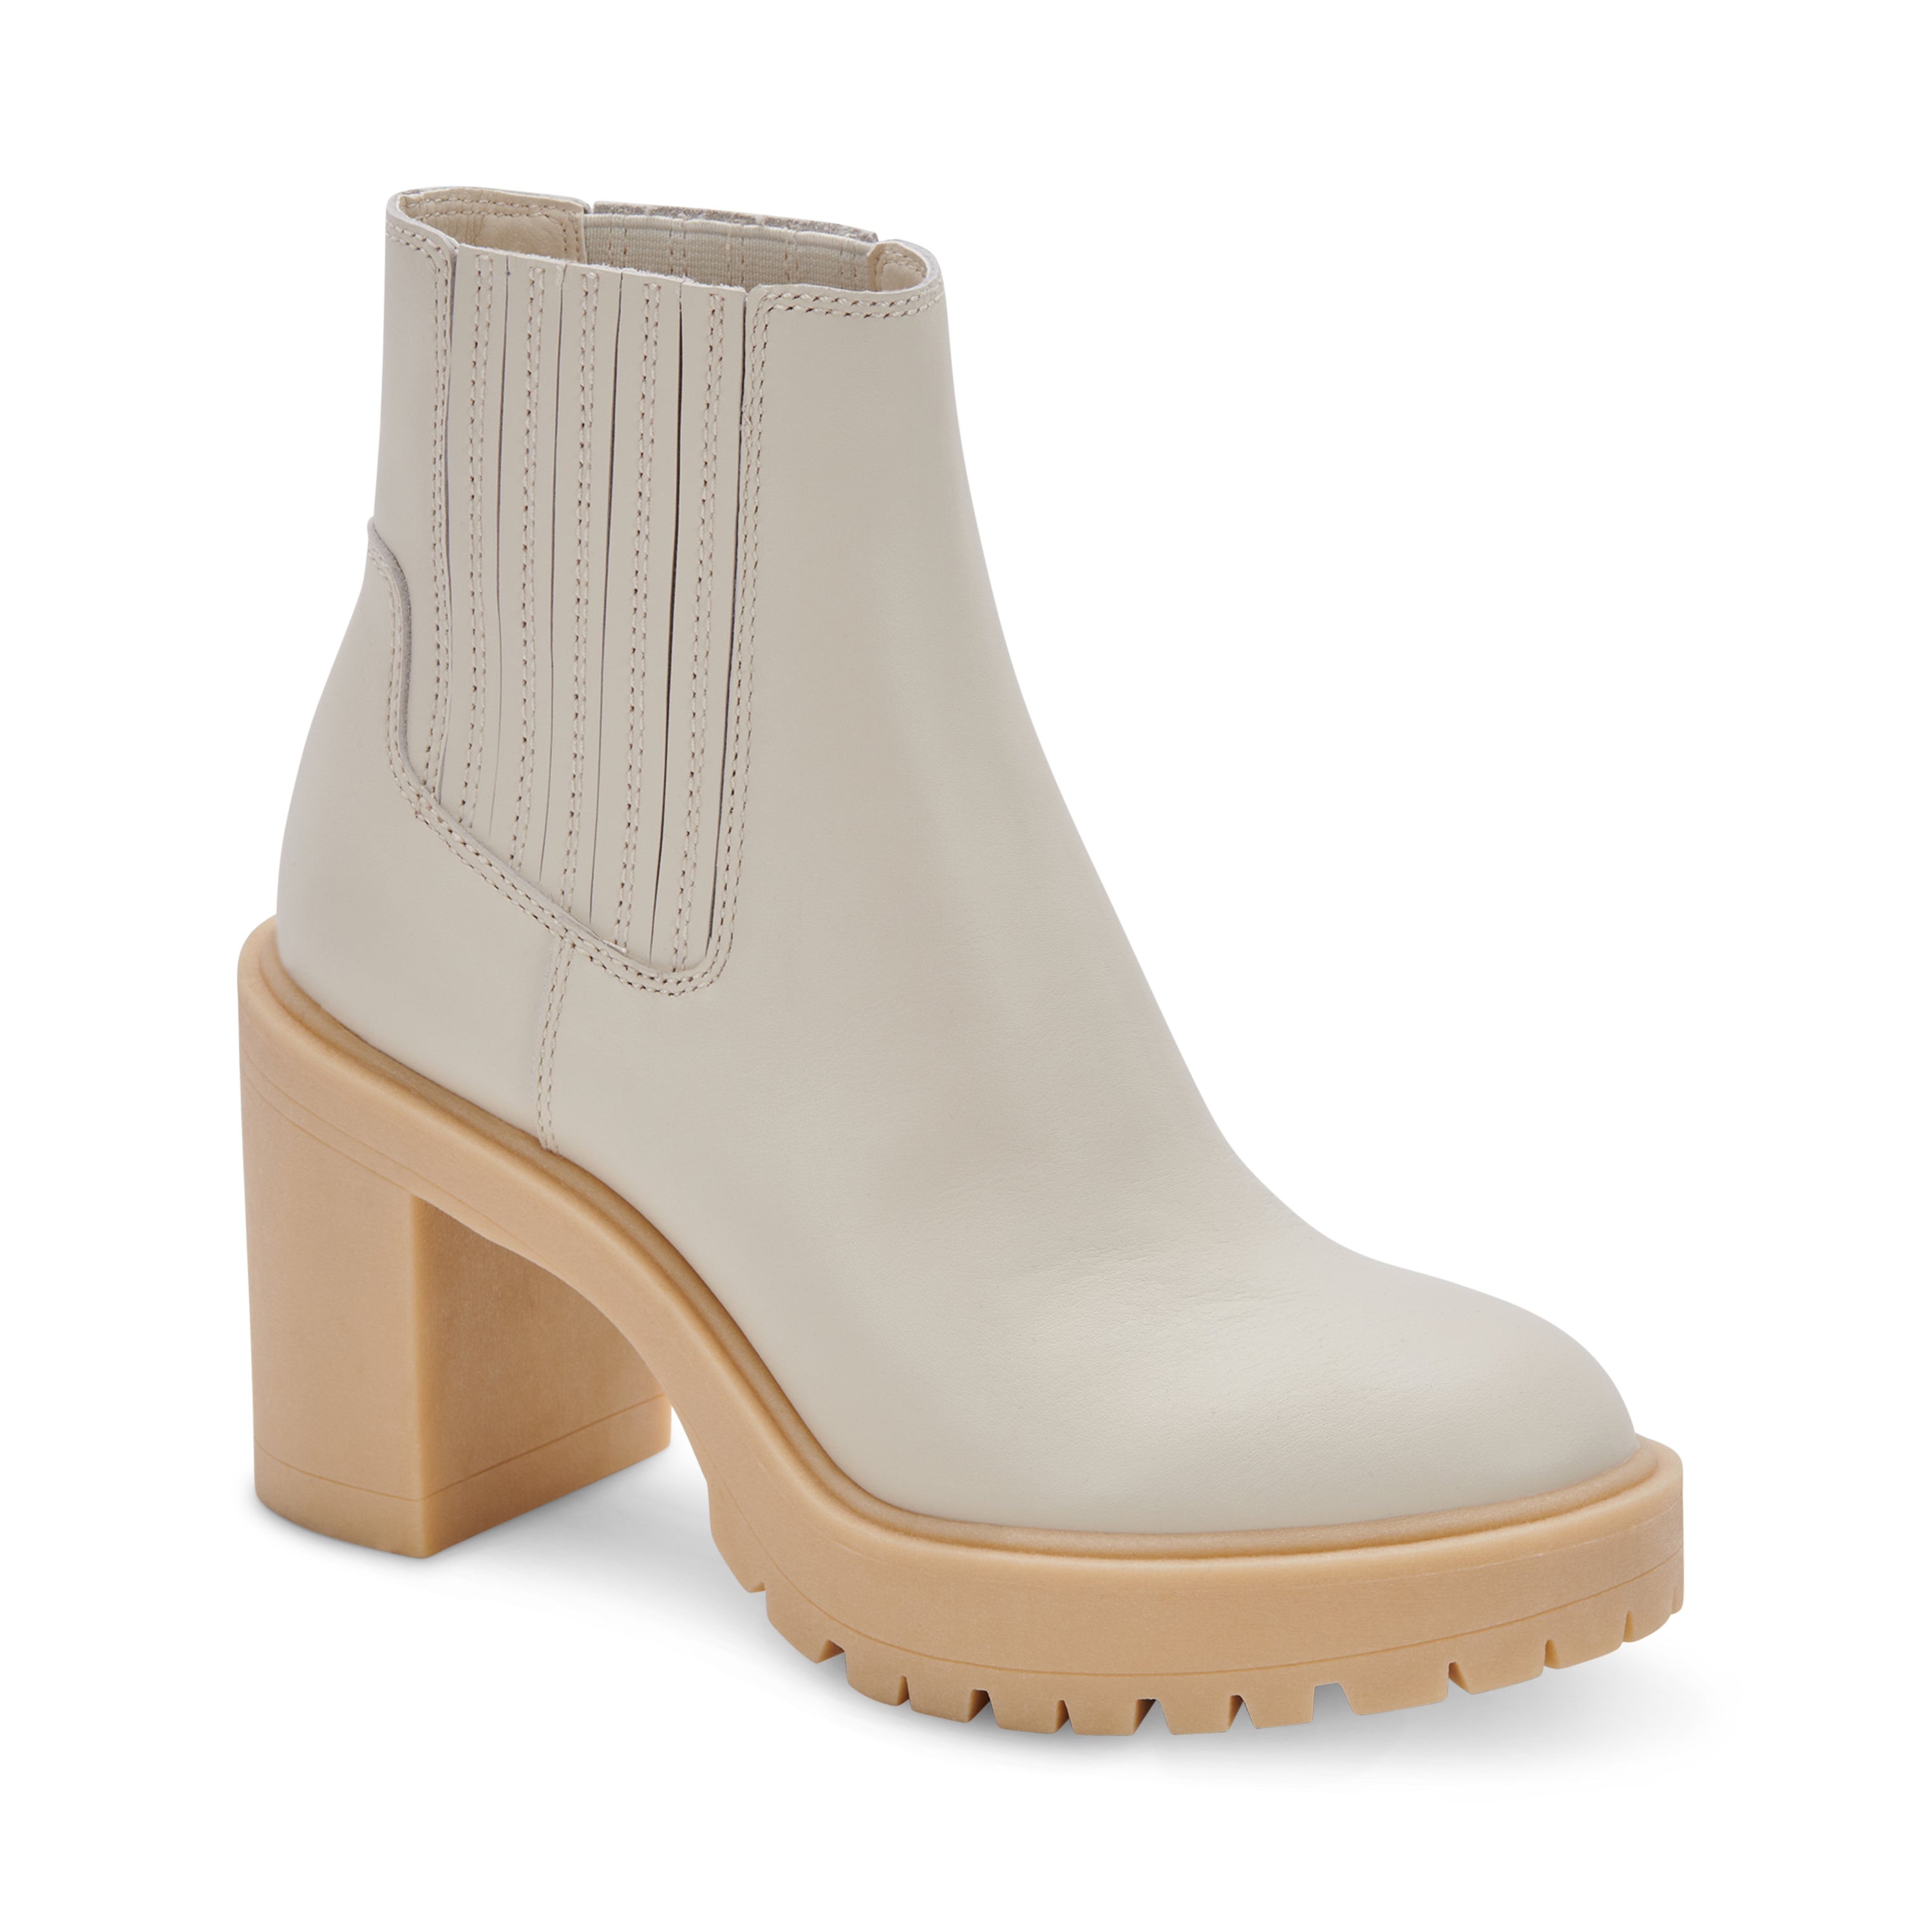 Caster H2o Ivory Leather Botines de Tacon Marfil